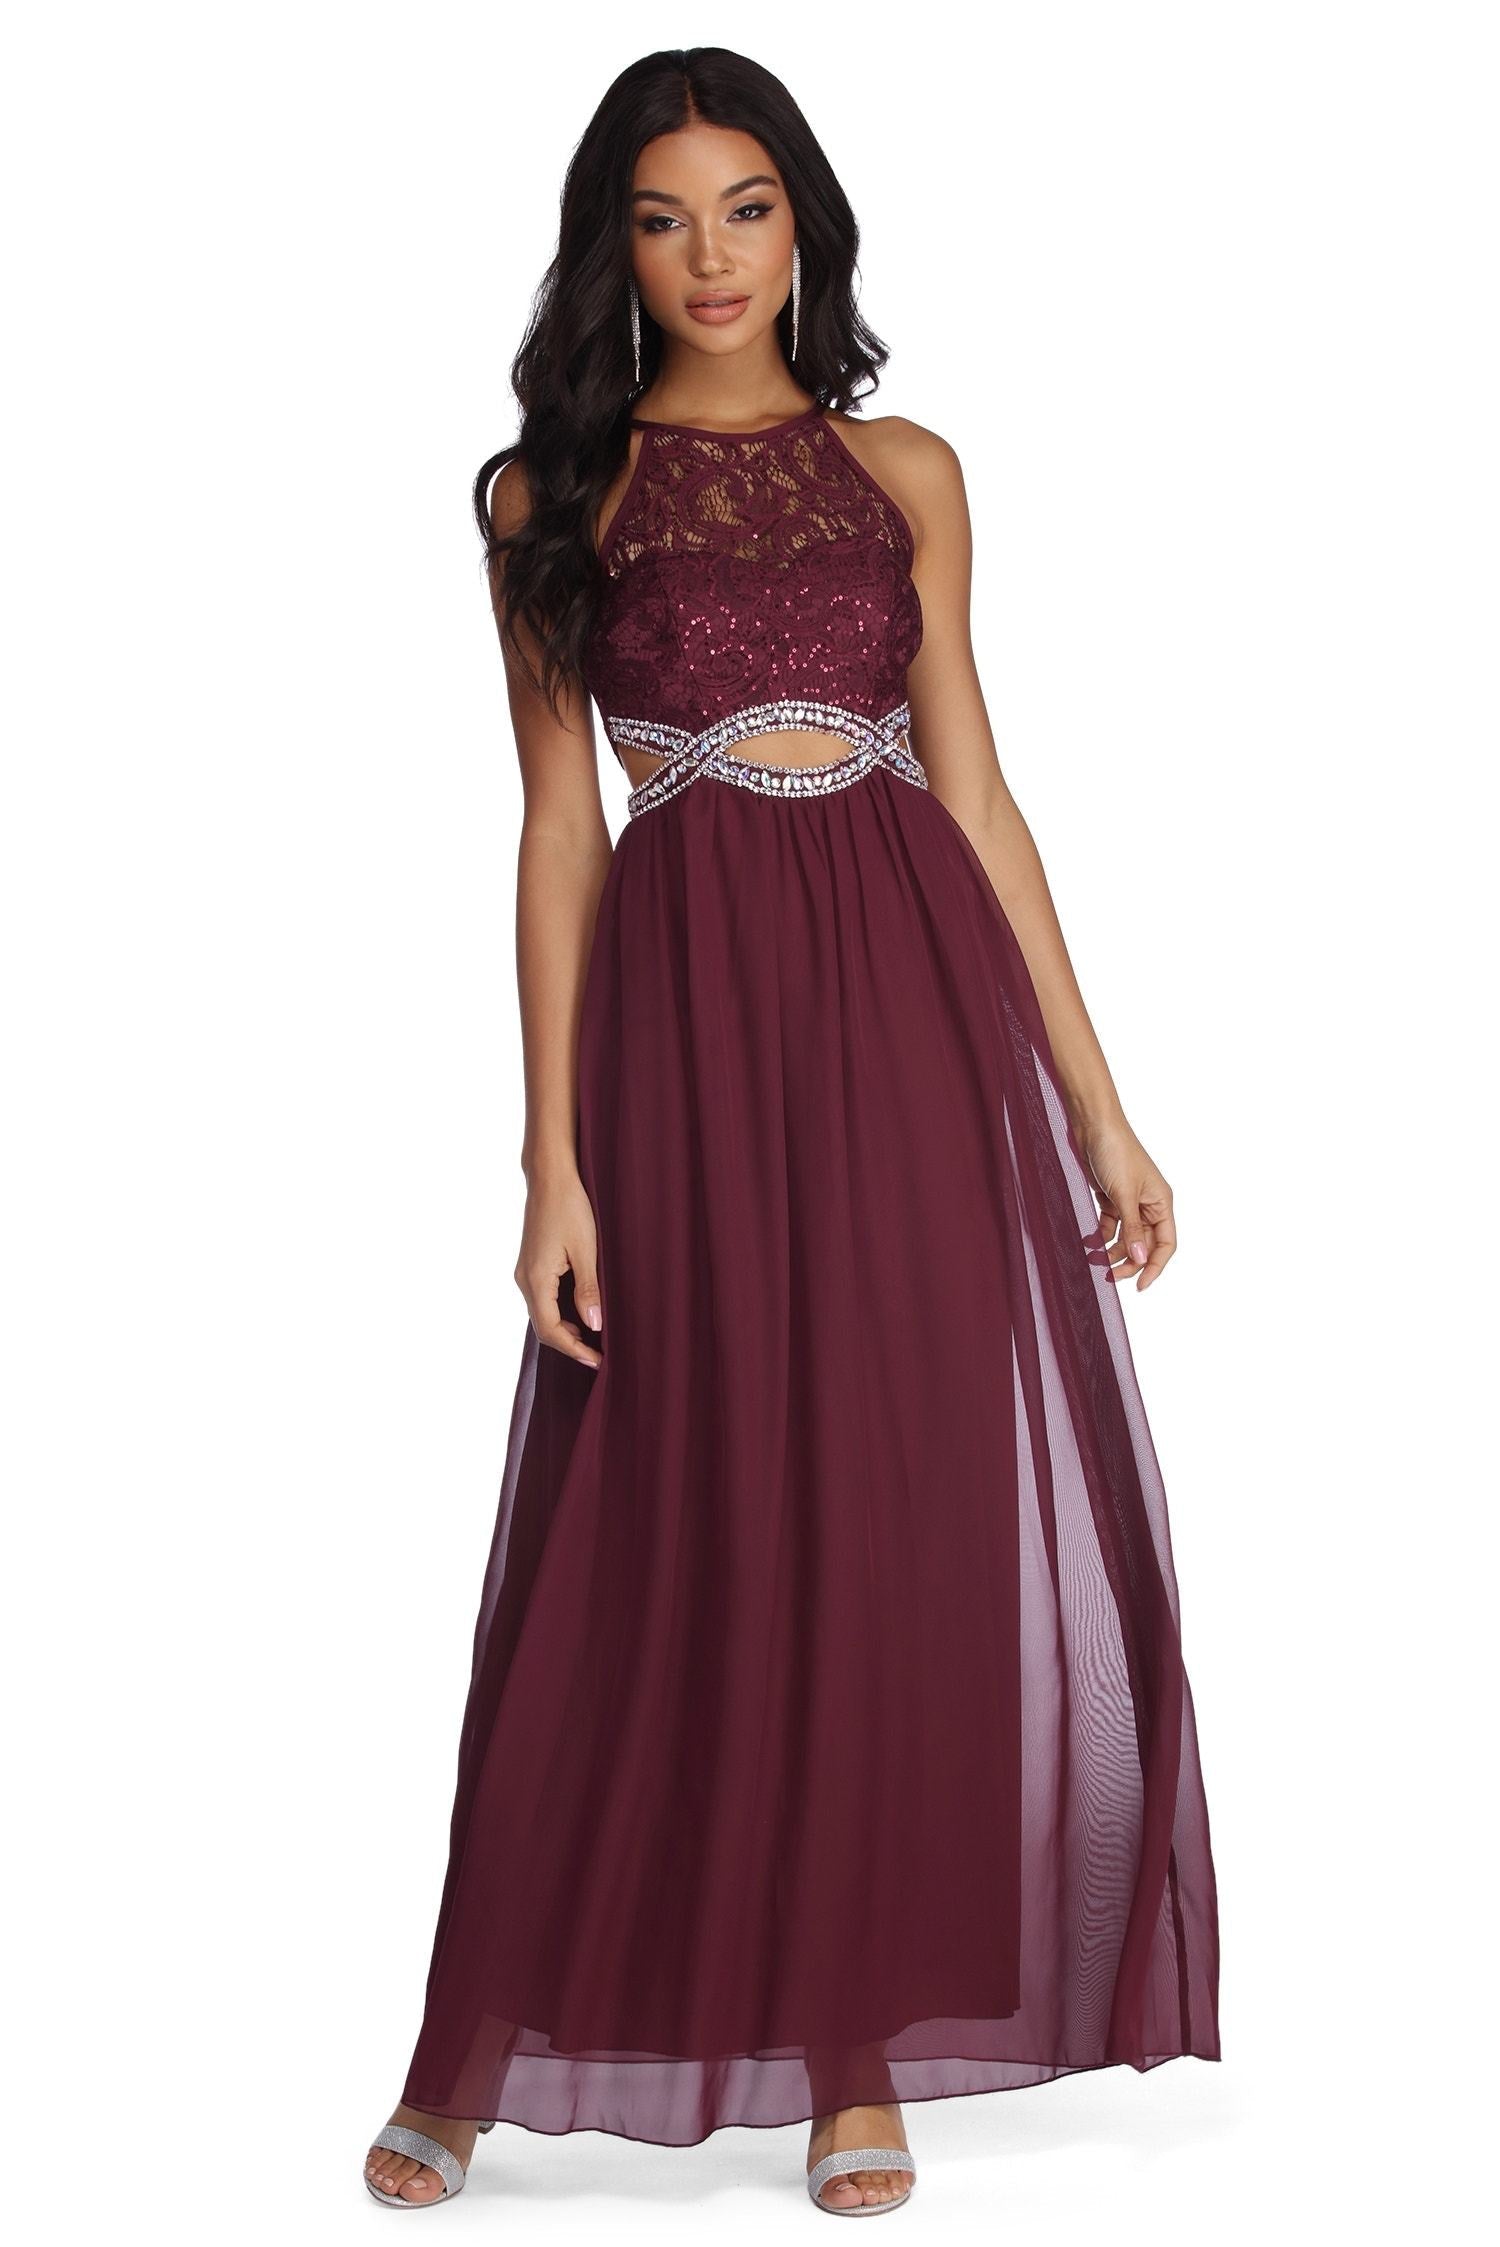 Anya Formal Lace And Gemstone Dresses